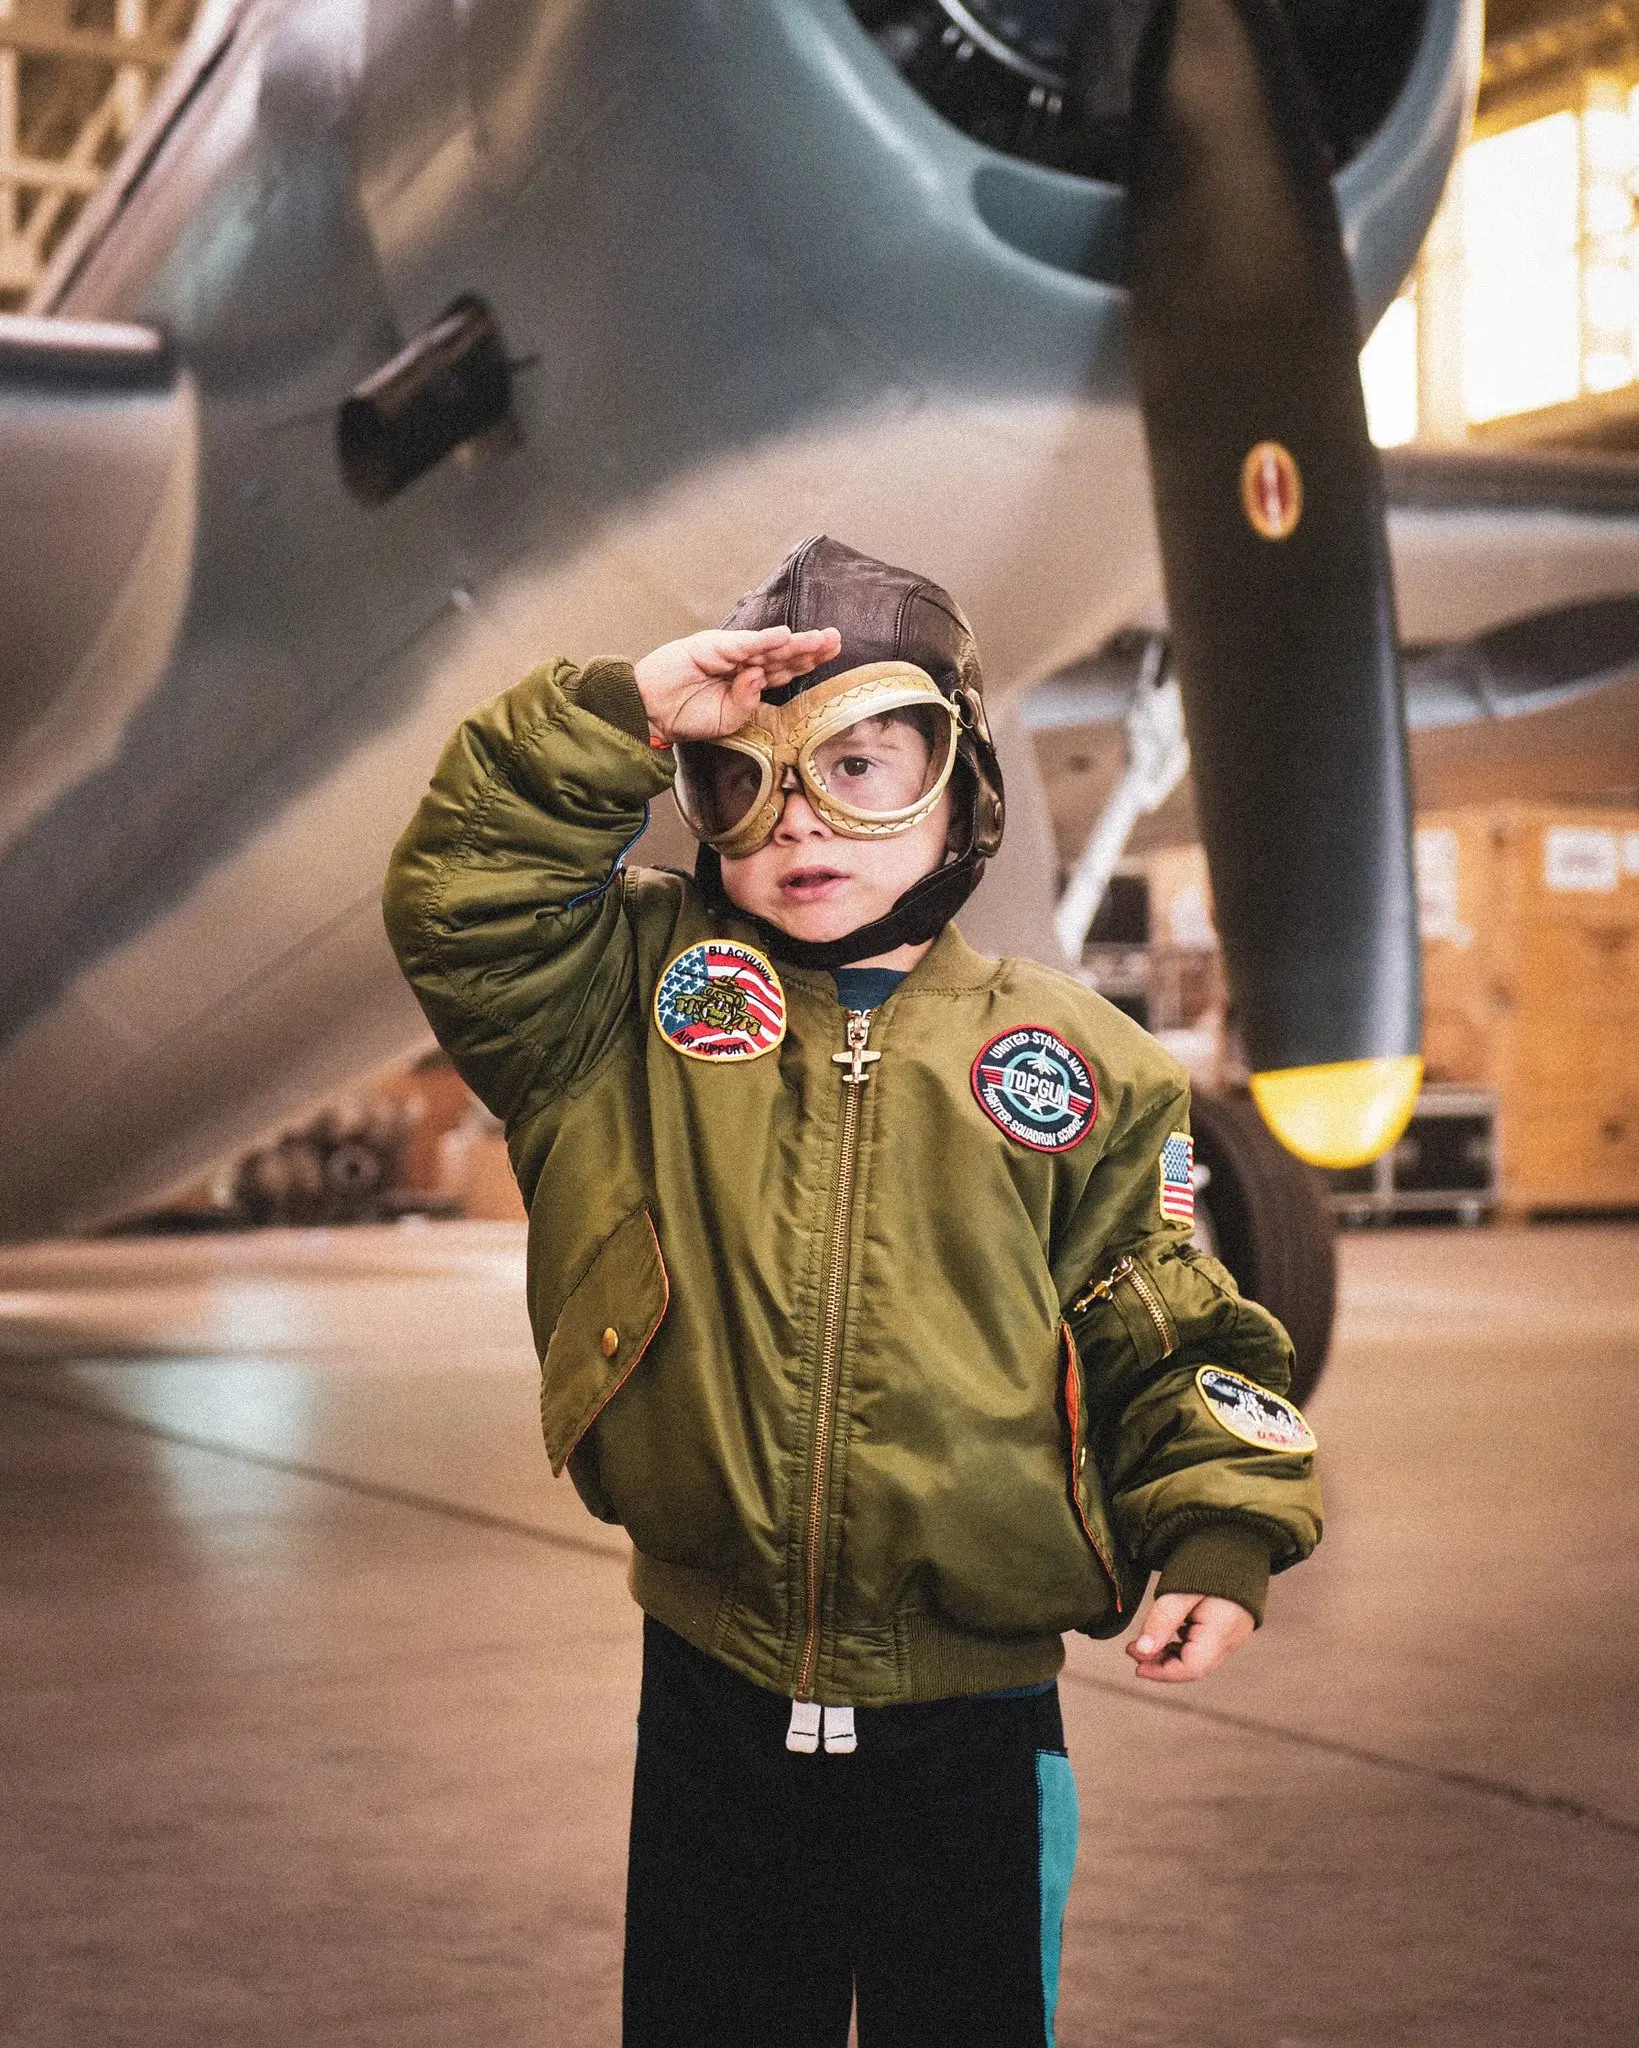 Boy dressed up saluting with a plane behind him